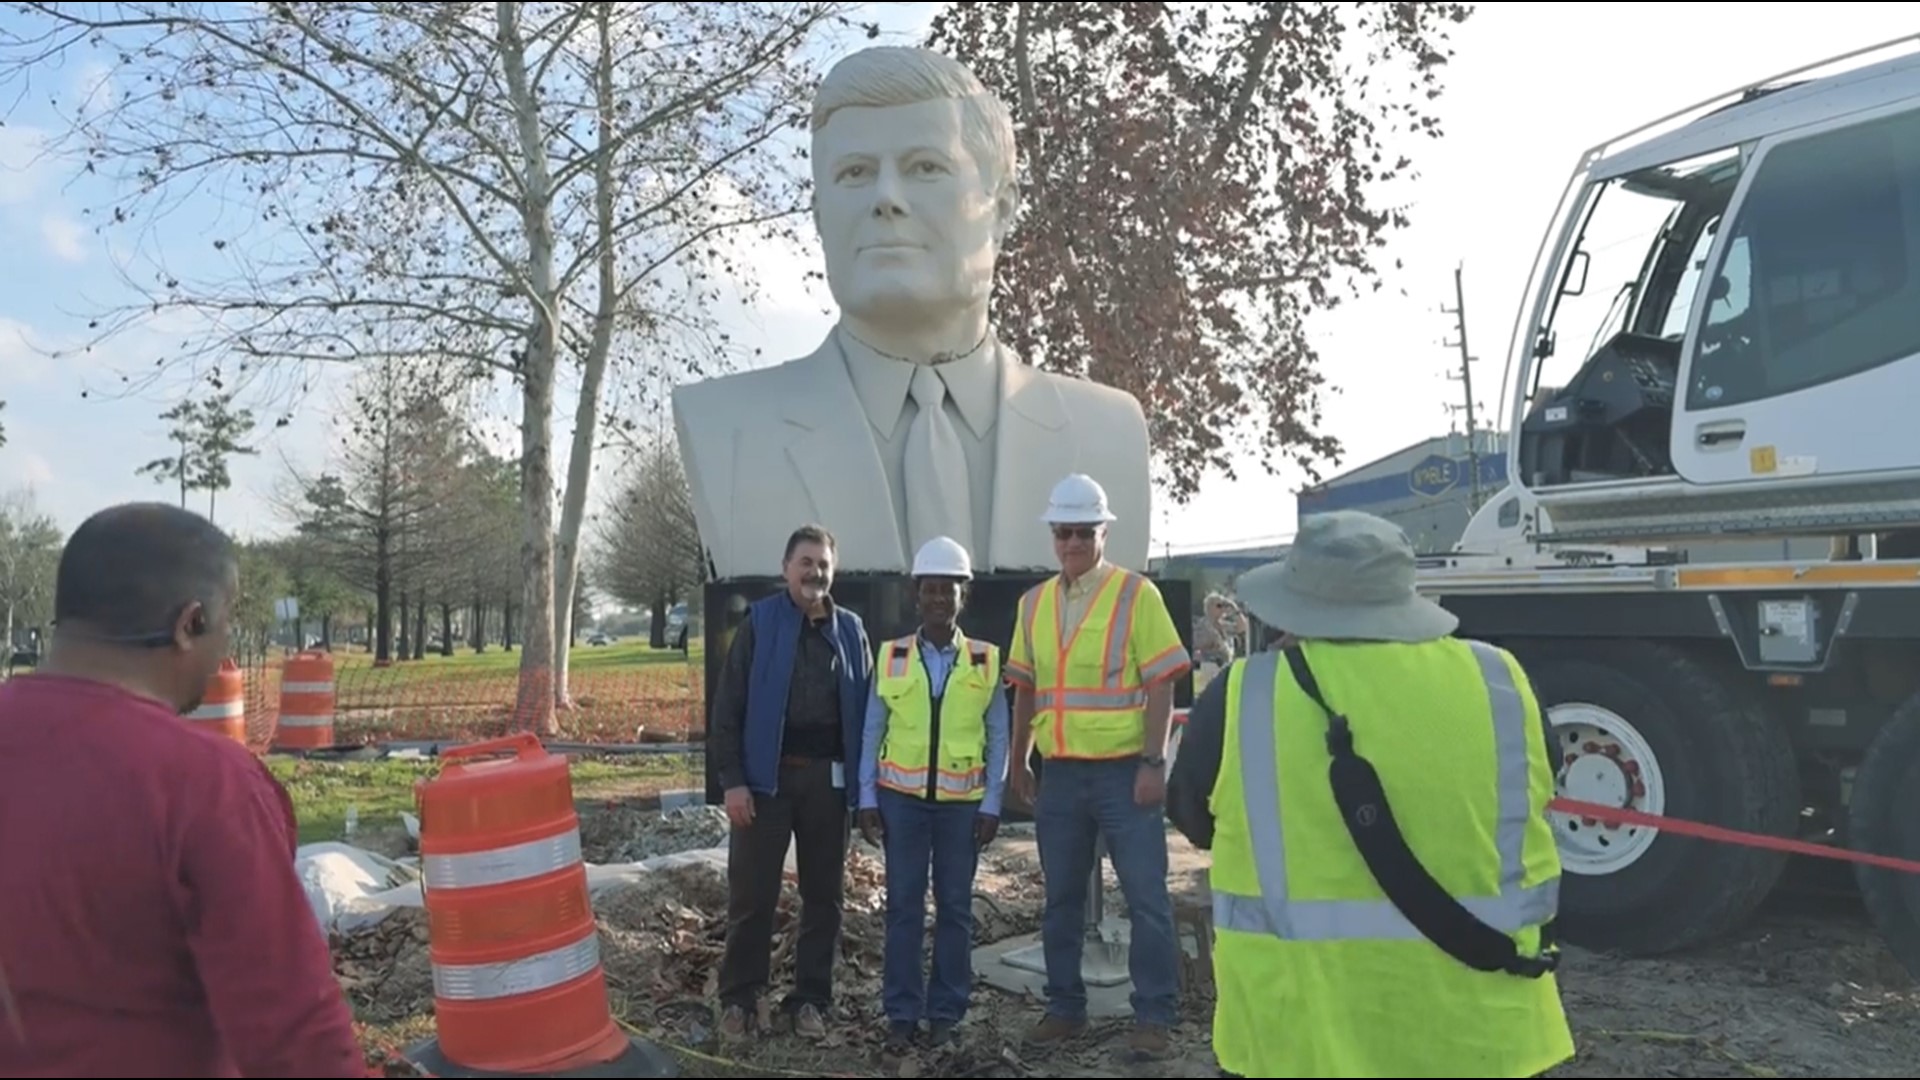 The statue has been put in the East Aldine Community, just minutes away from Bush Airport.